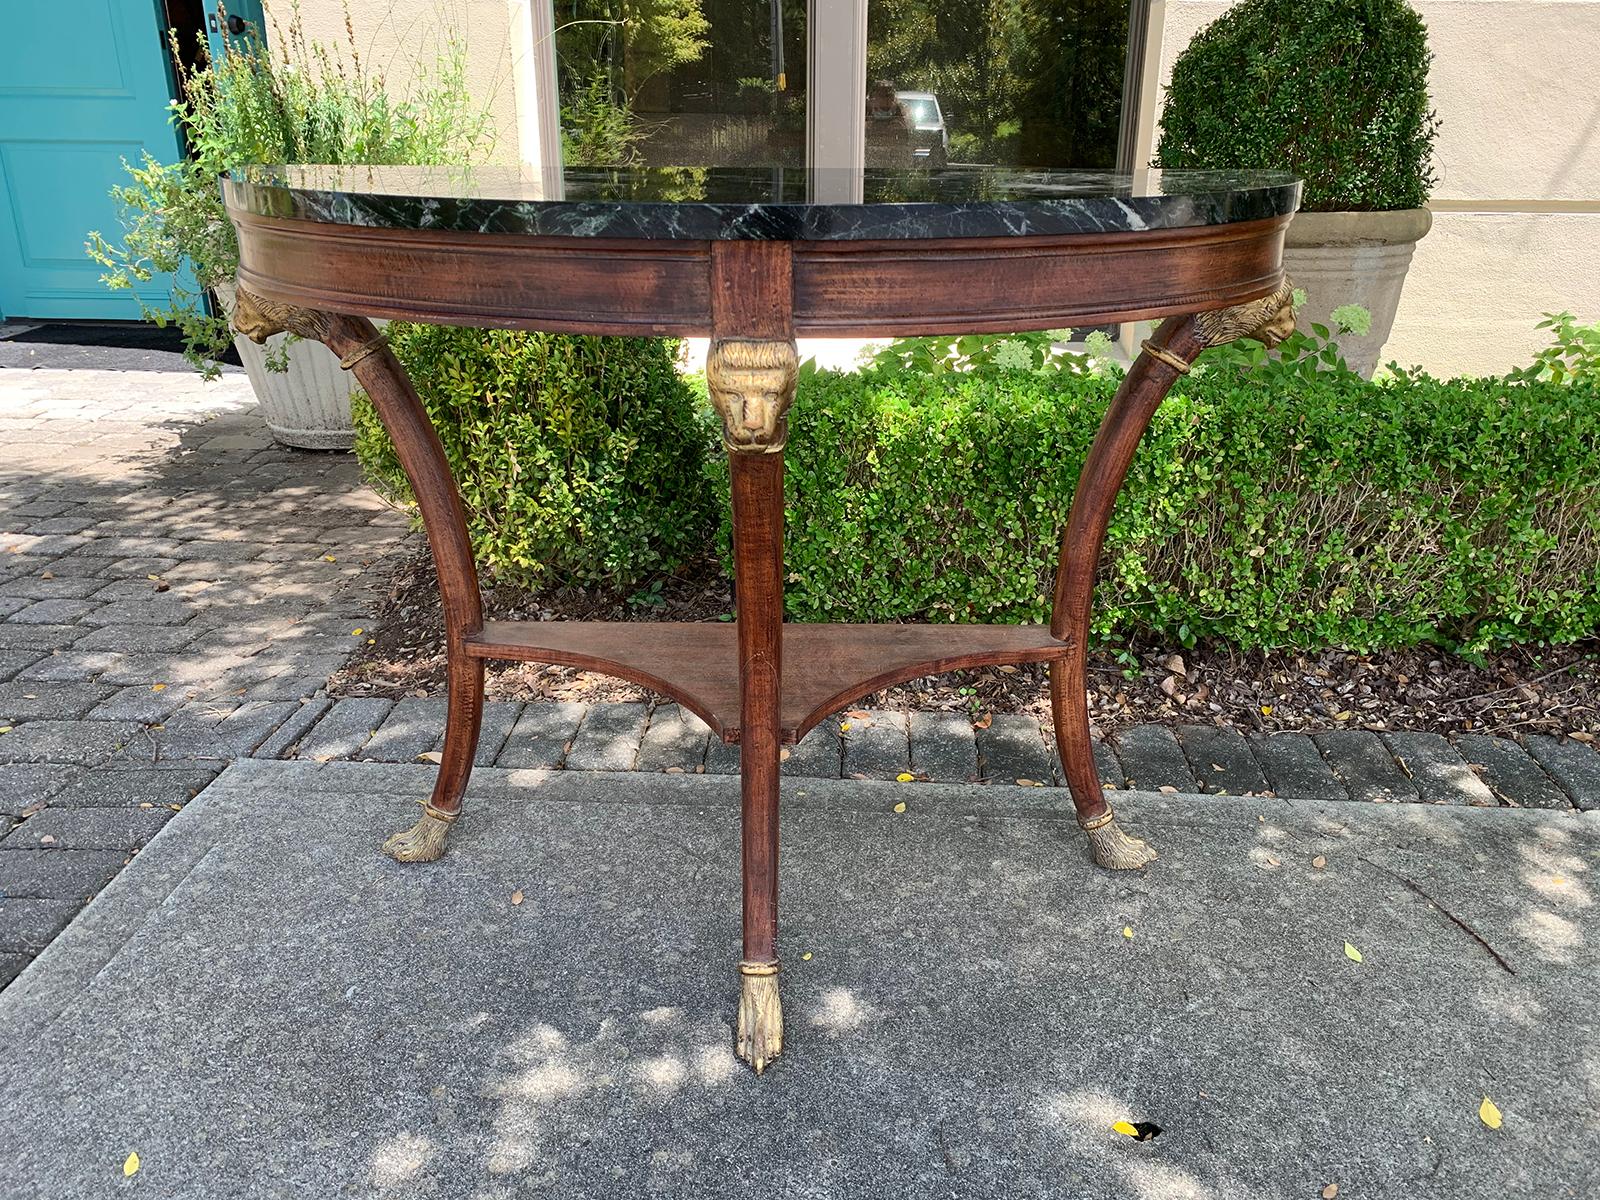 20th century circa 1950s Italian neoclassical marble-top faux bois demilune console table with carved and gilded lion heads and paw feet, old label.
Marble is 1